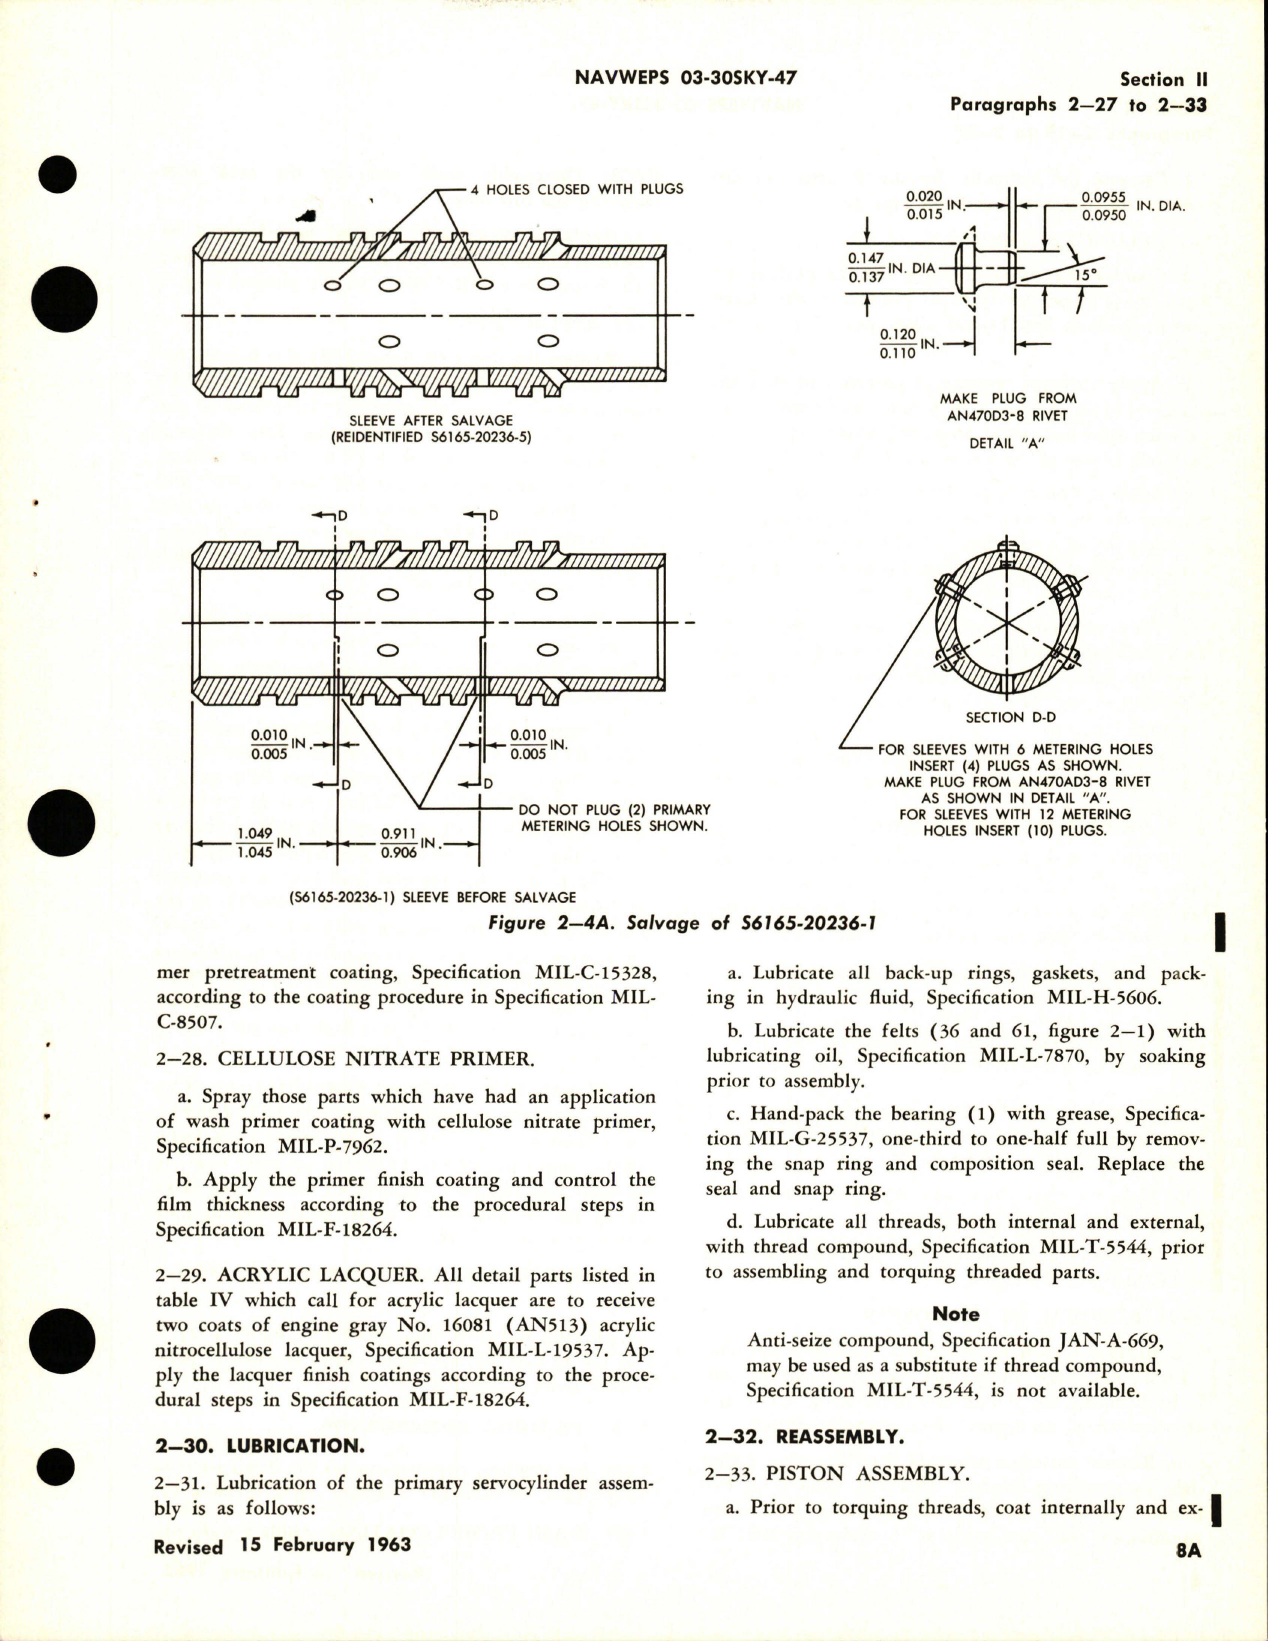 Sample page 5 from AirCorps Library document: Overhaul Instructions for Primary Servocylinder Assembly